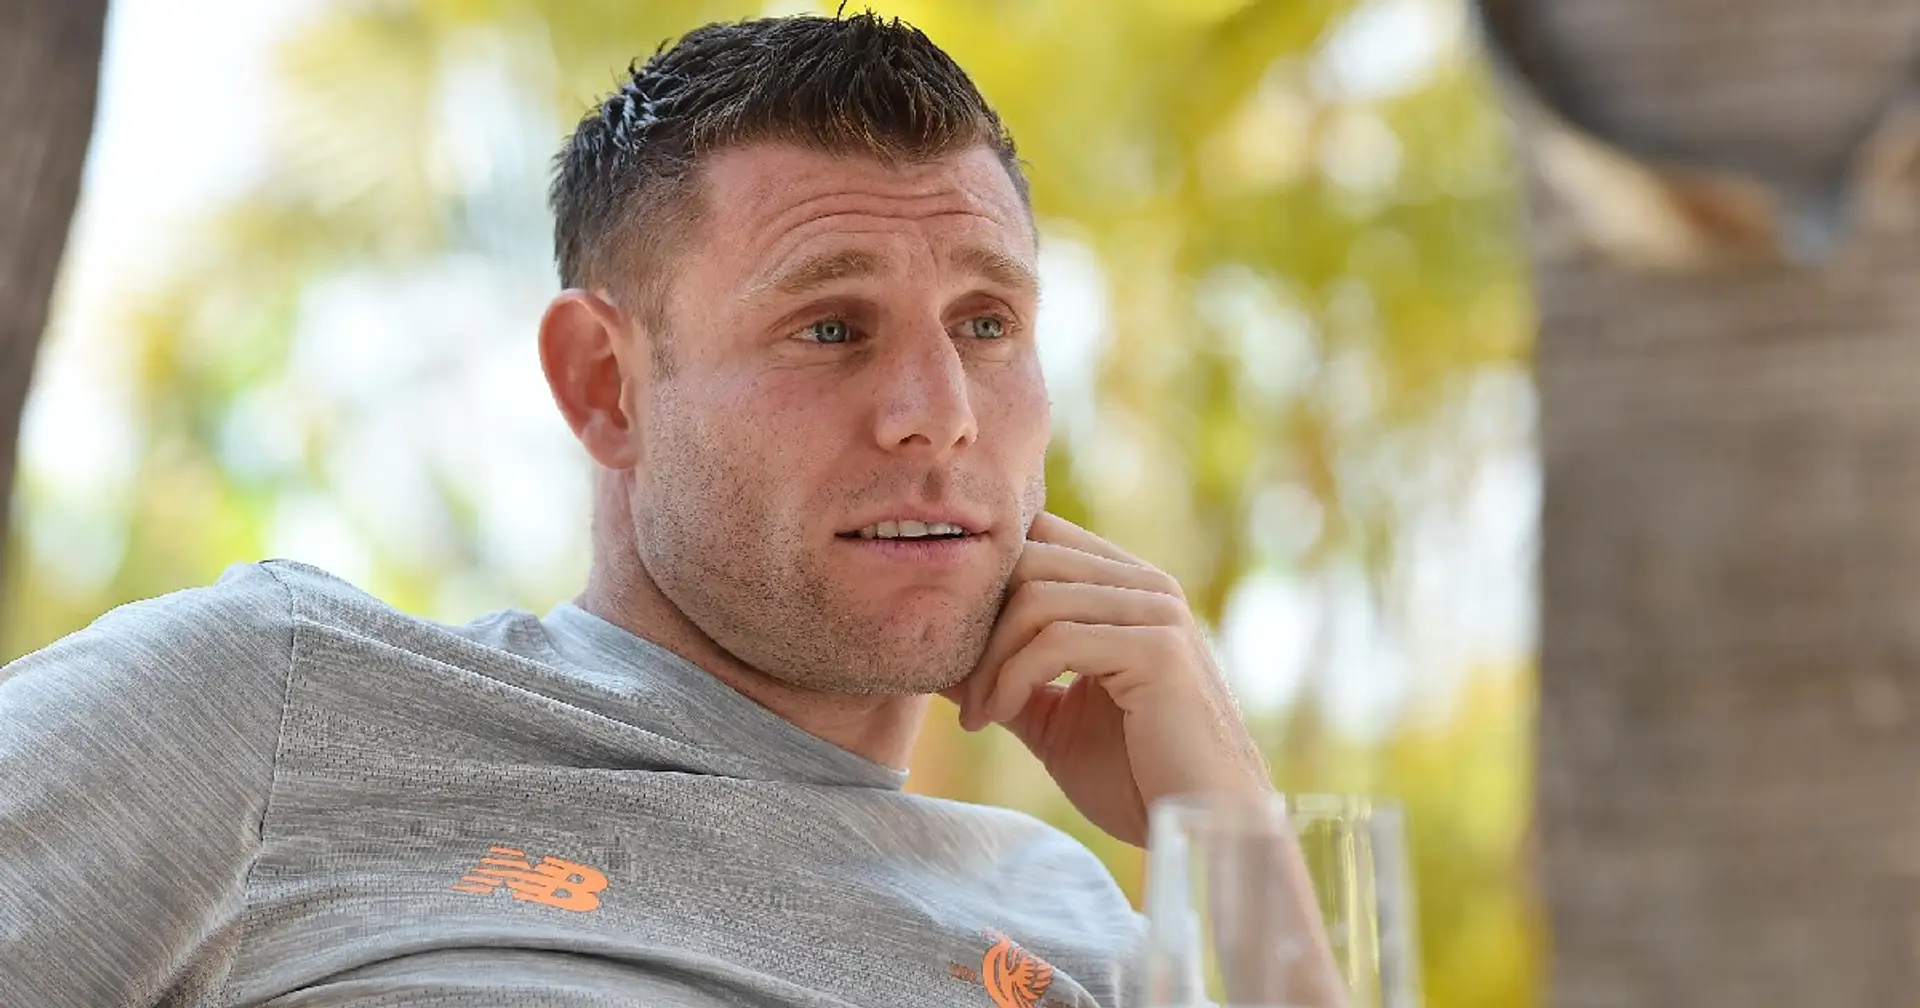 'How long can this go on, where’s it all heading': Milner proposes alternate summers with no football to protect players